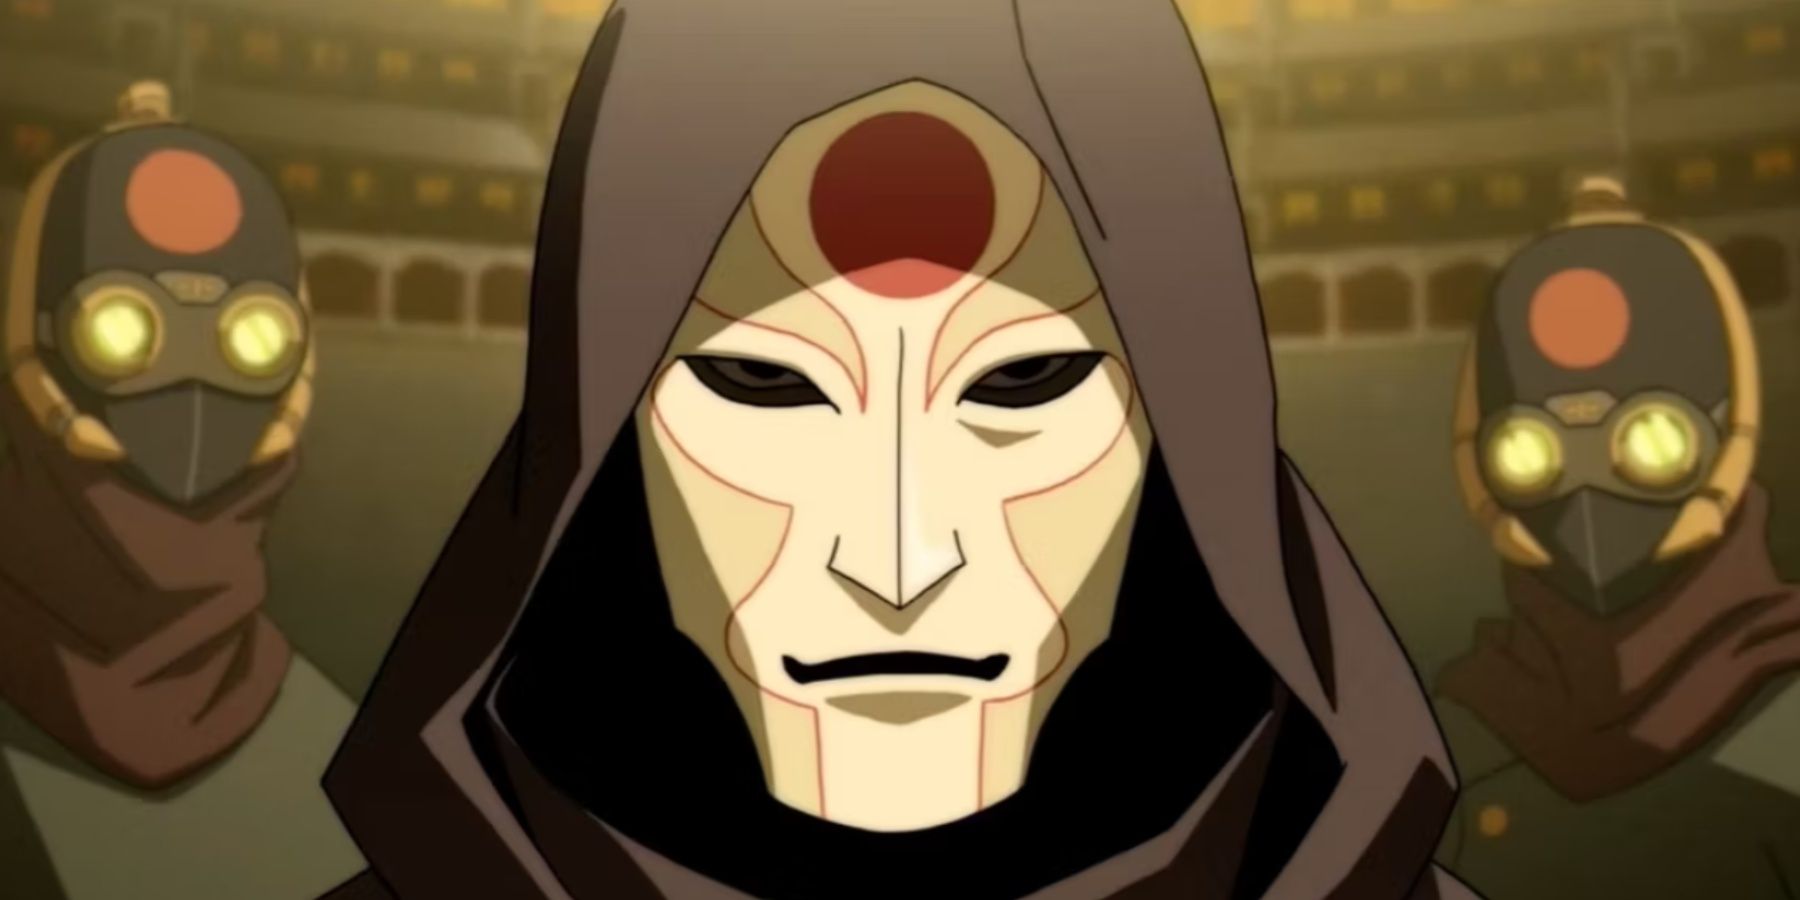 Amon and the Equalists making their debut in The Legend of Korra